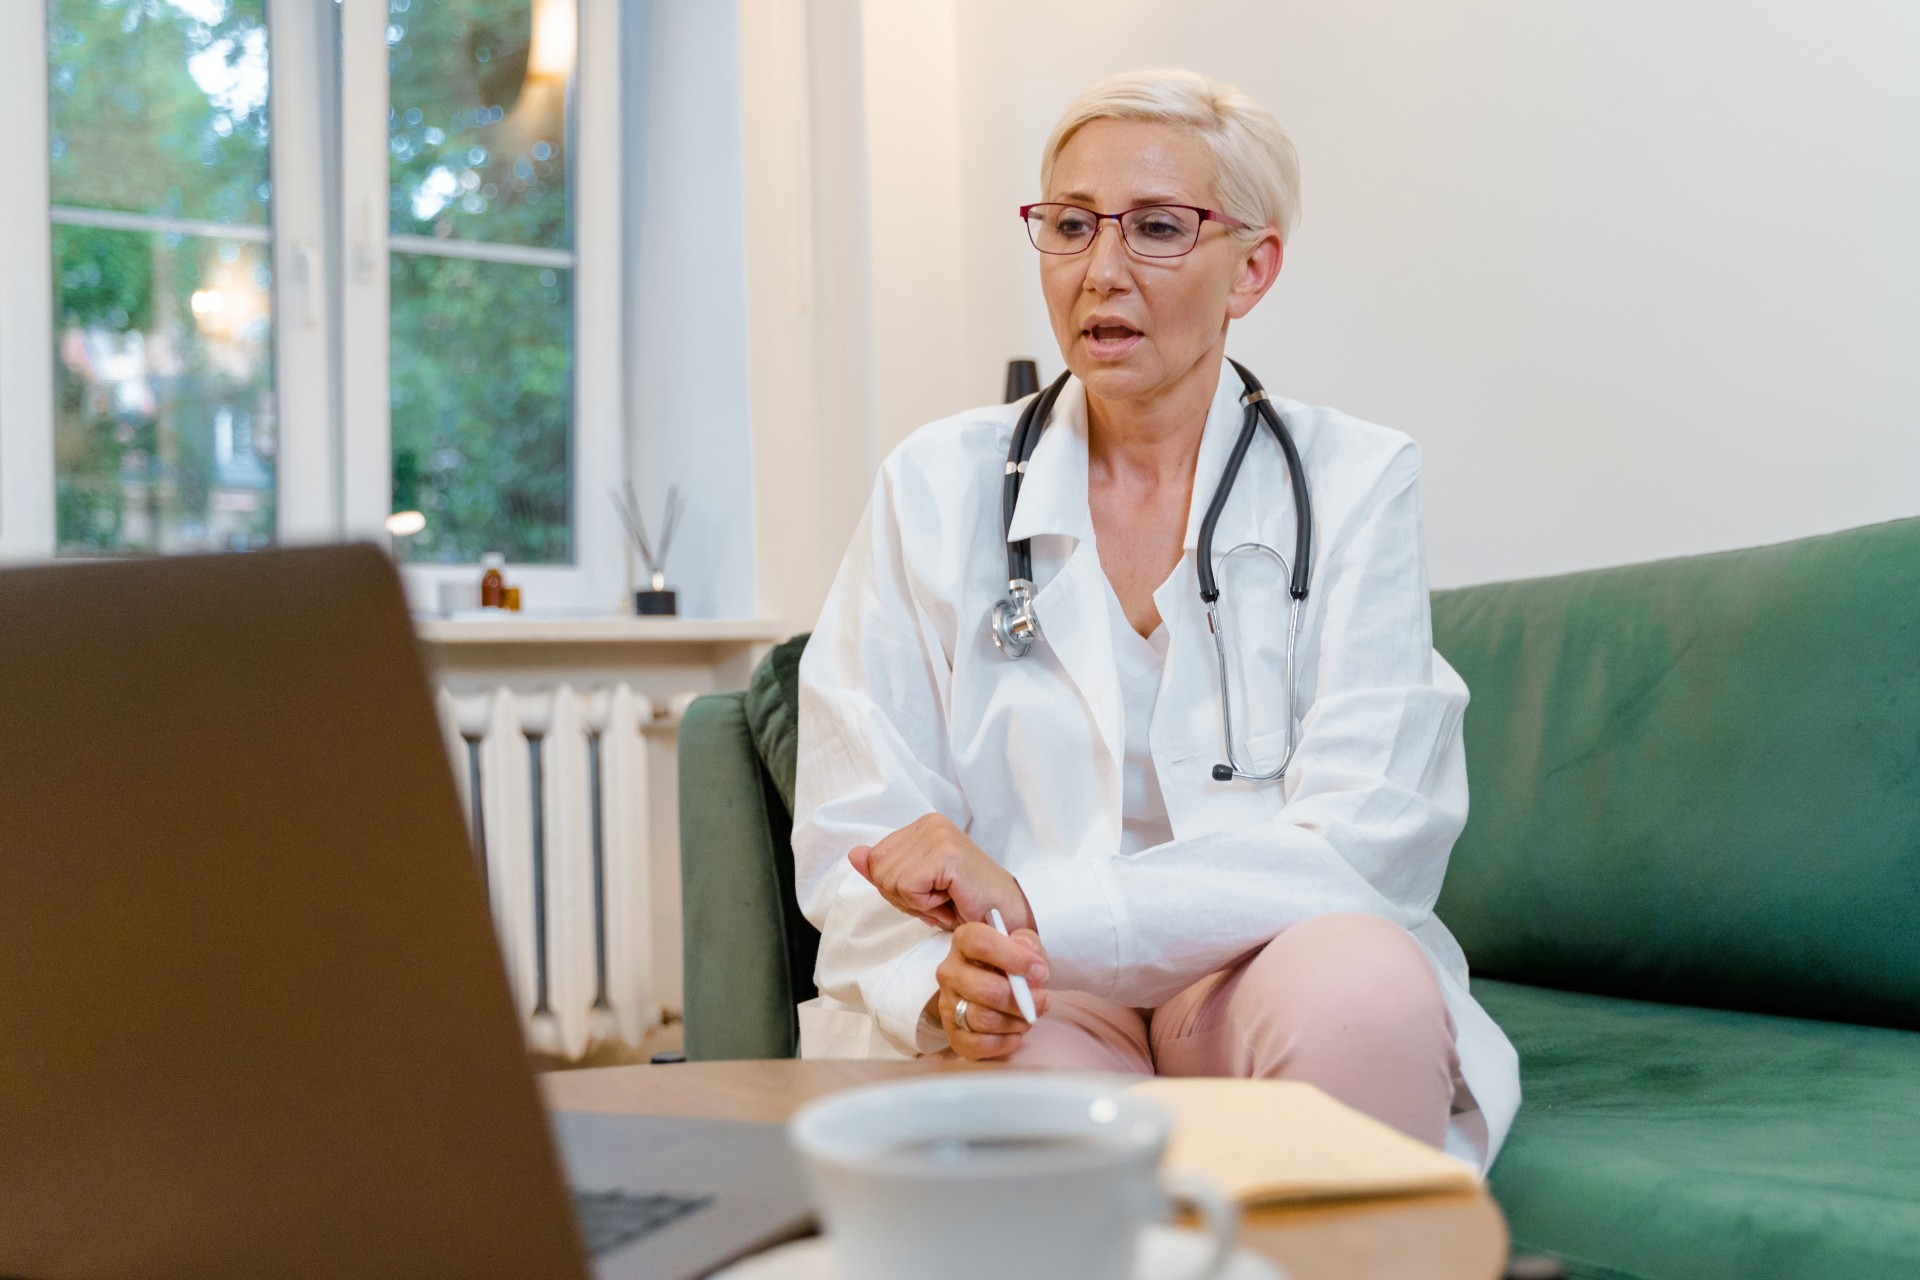 How does an online doctor or other remote healthcare worker succeed in today's environment? By using tech to individualize patient care.